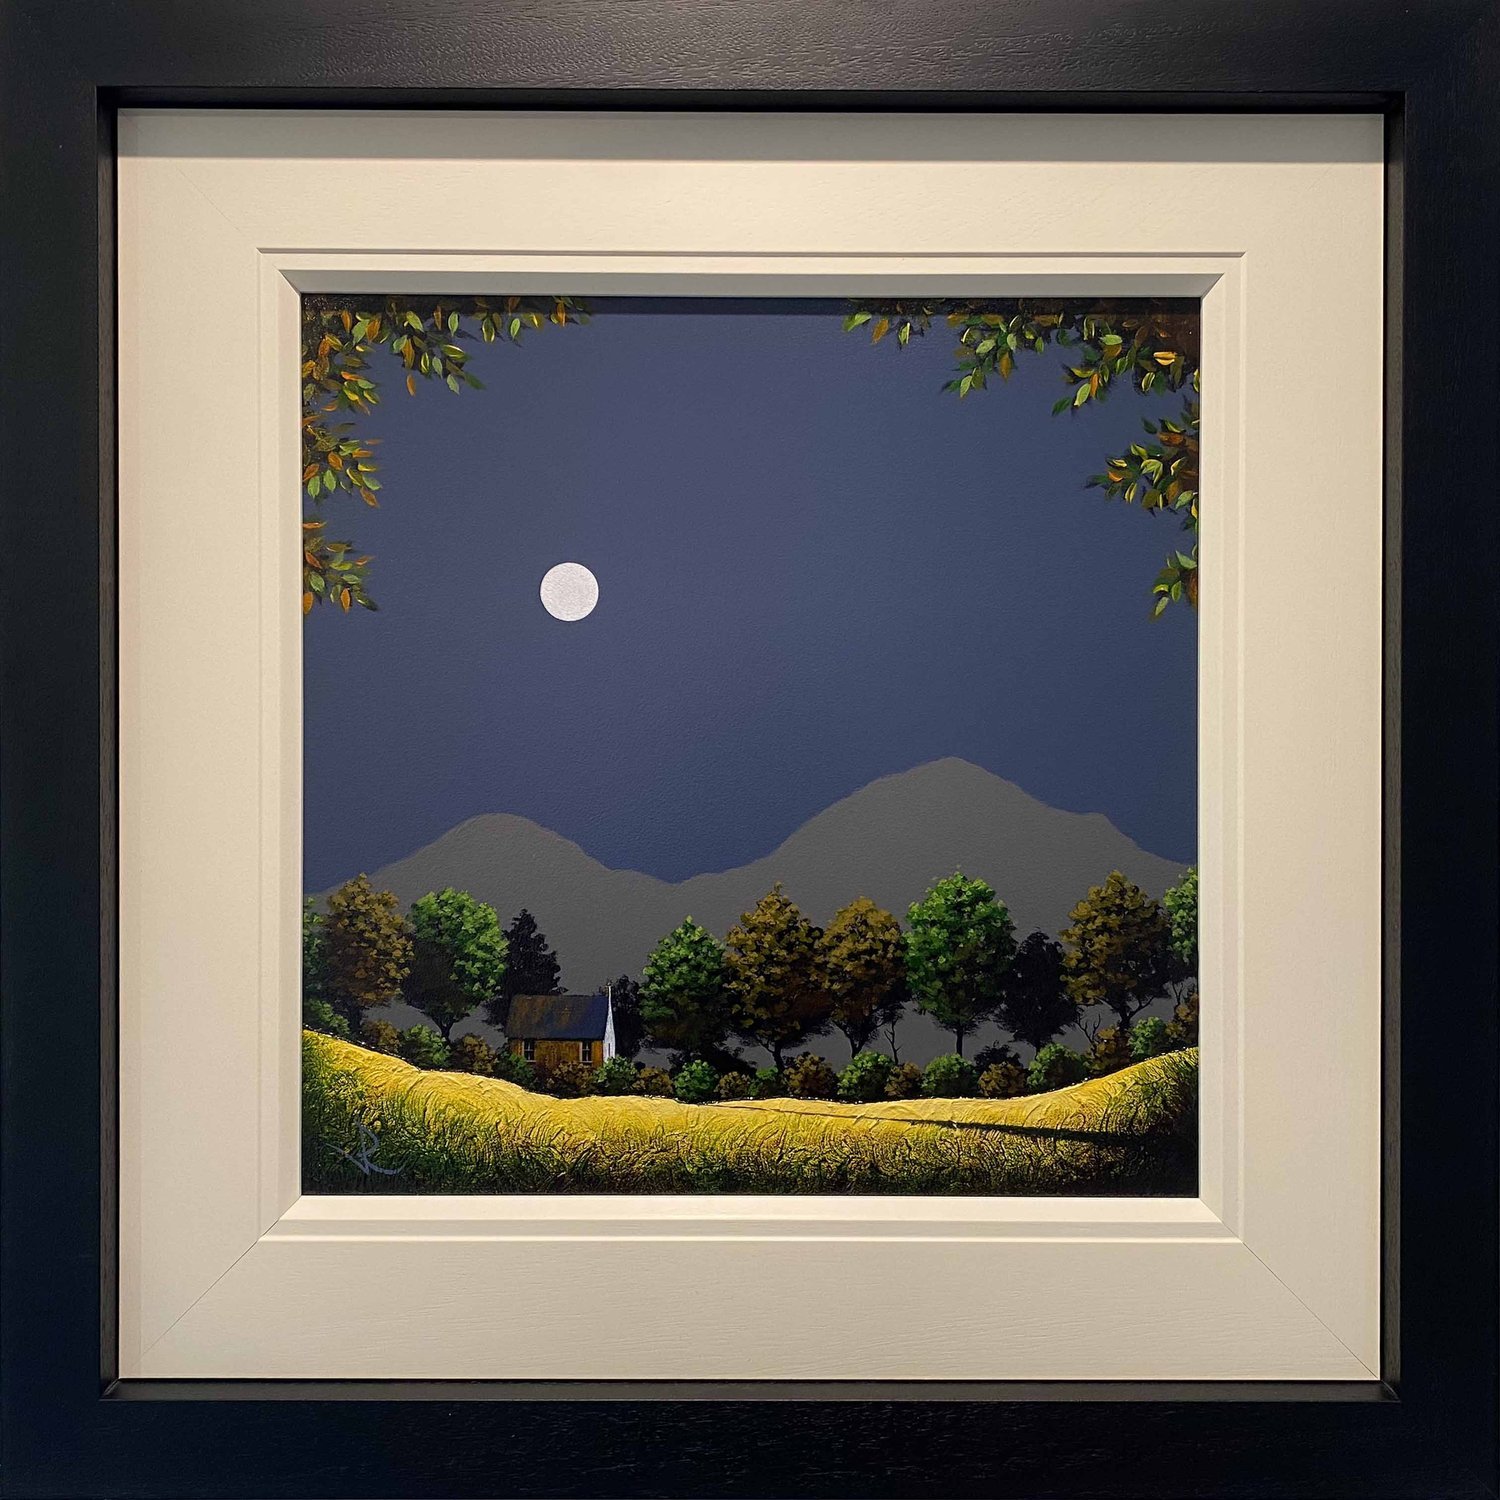 'Moonlit cottage' (Original) by John Russell 🌑

10% off in our BIG ART SALE: www.acgallery.co.uk/john-russell